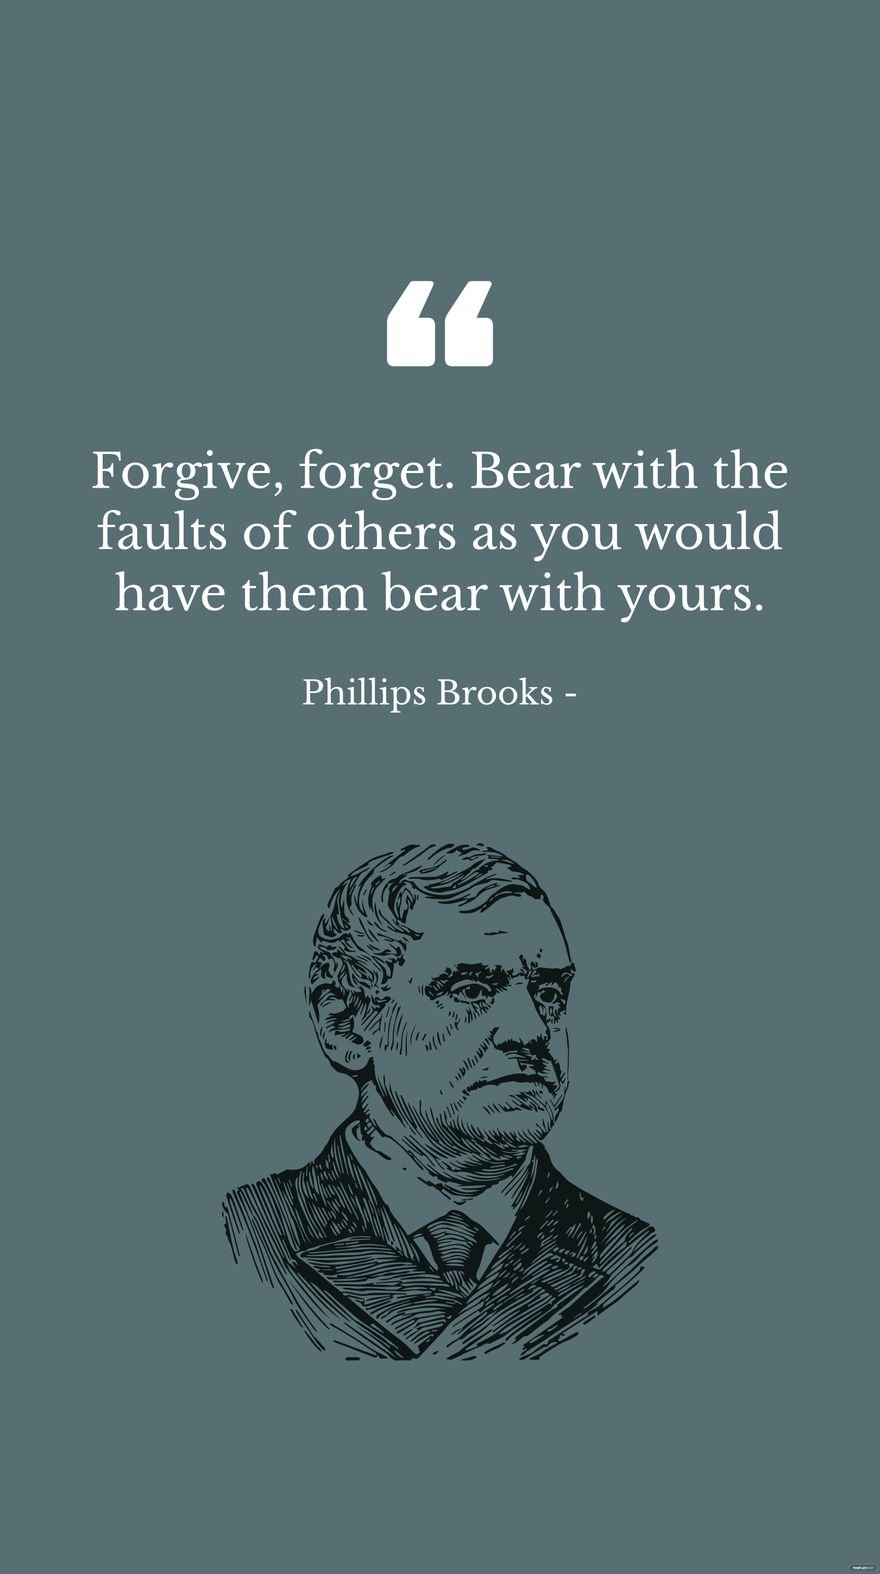 Phillips Brooks - Forgive, forget. Bear with the faults of others as you would have them bear with yours.